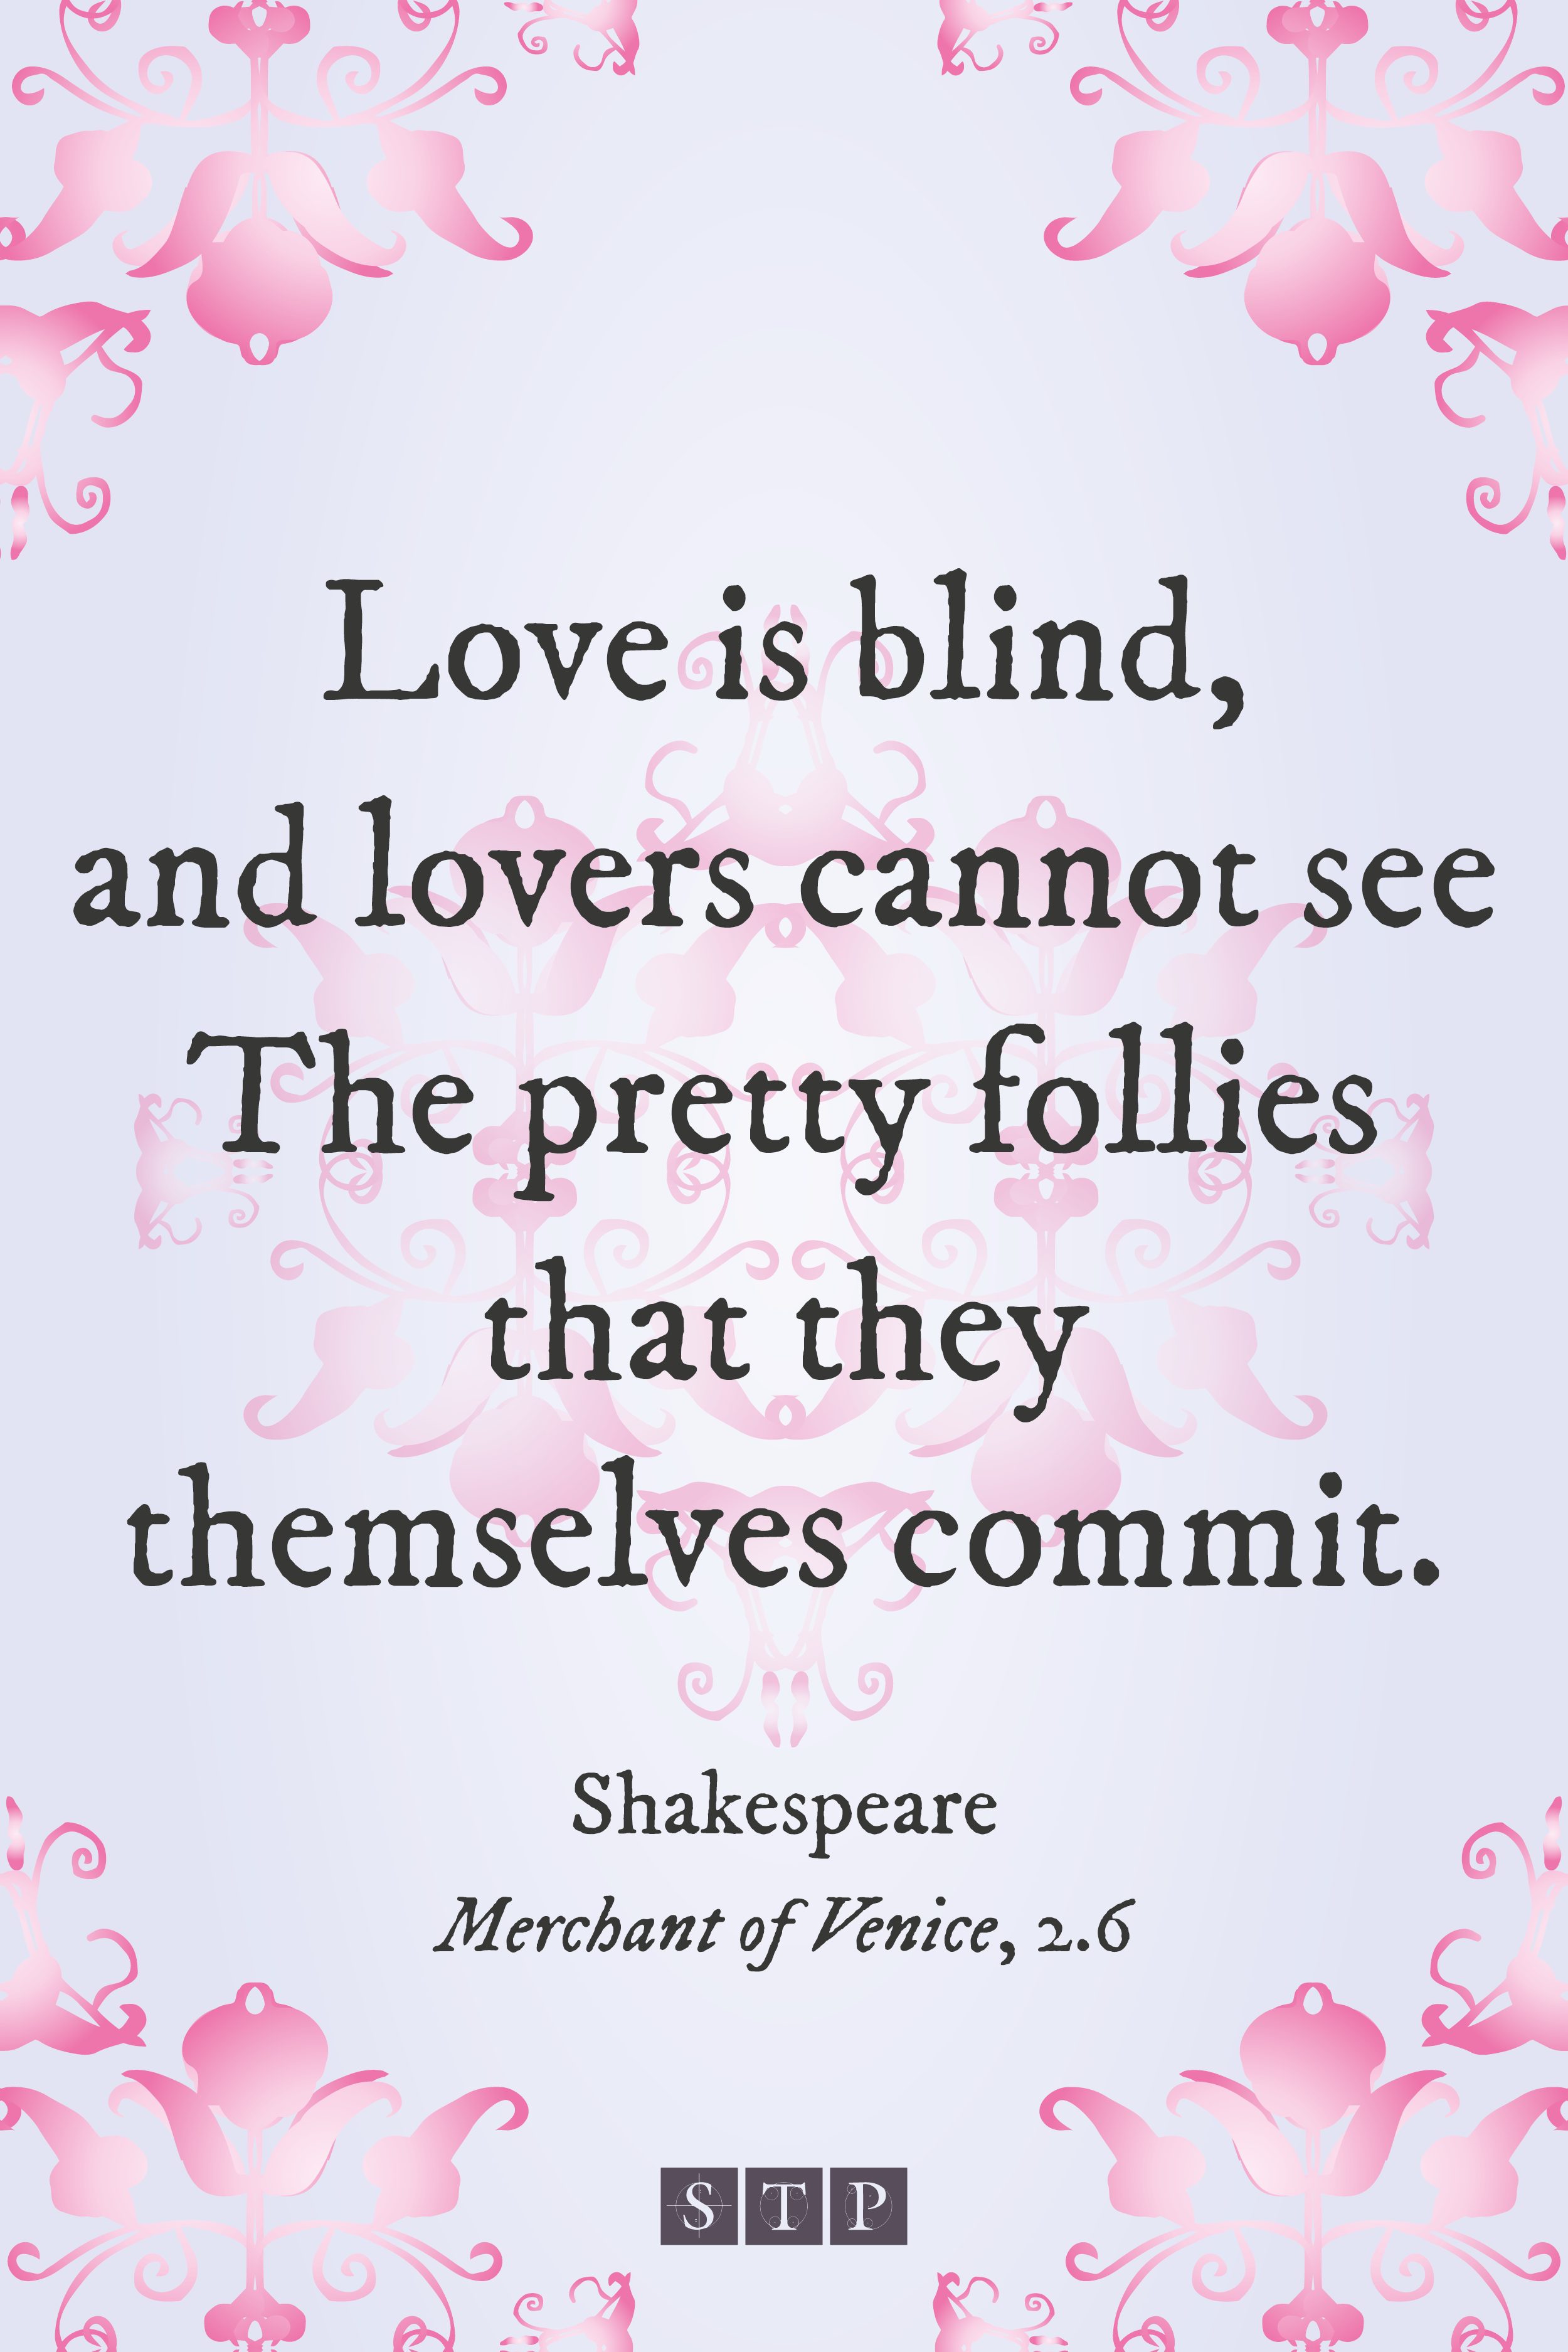 6 Blind Faith Quotes About Love